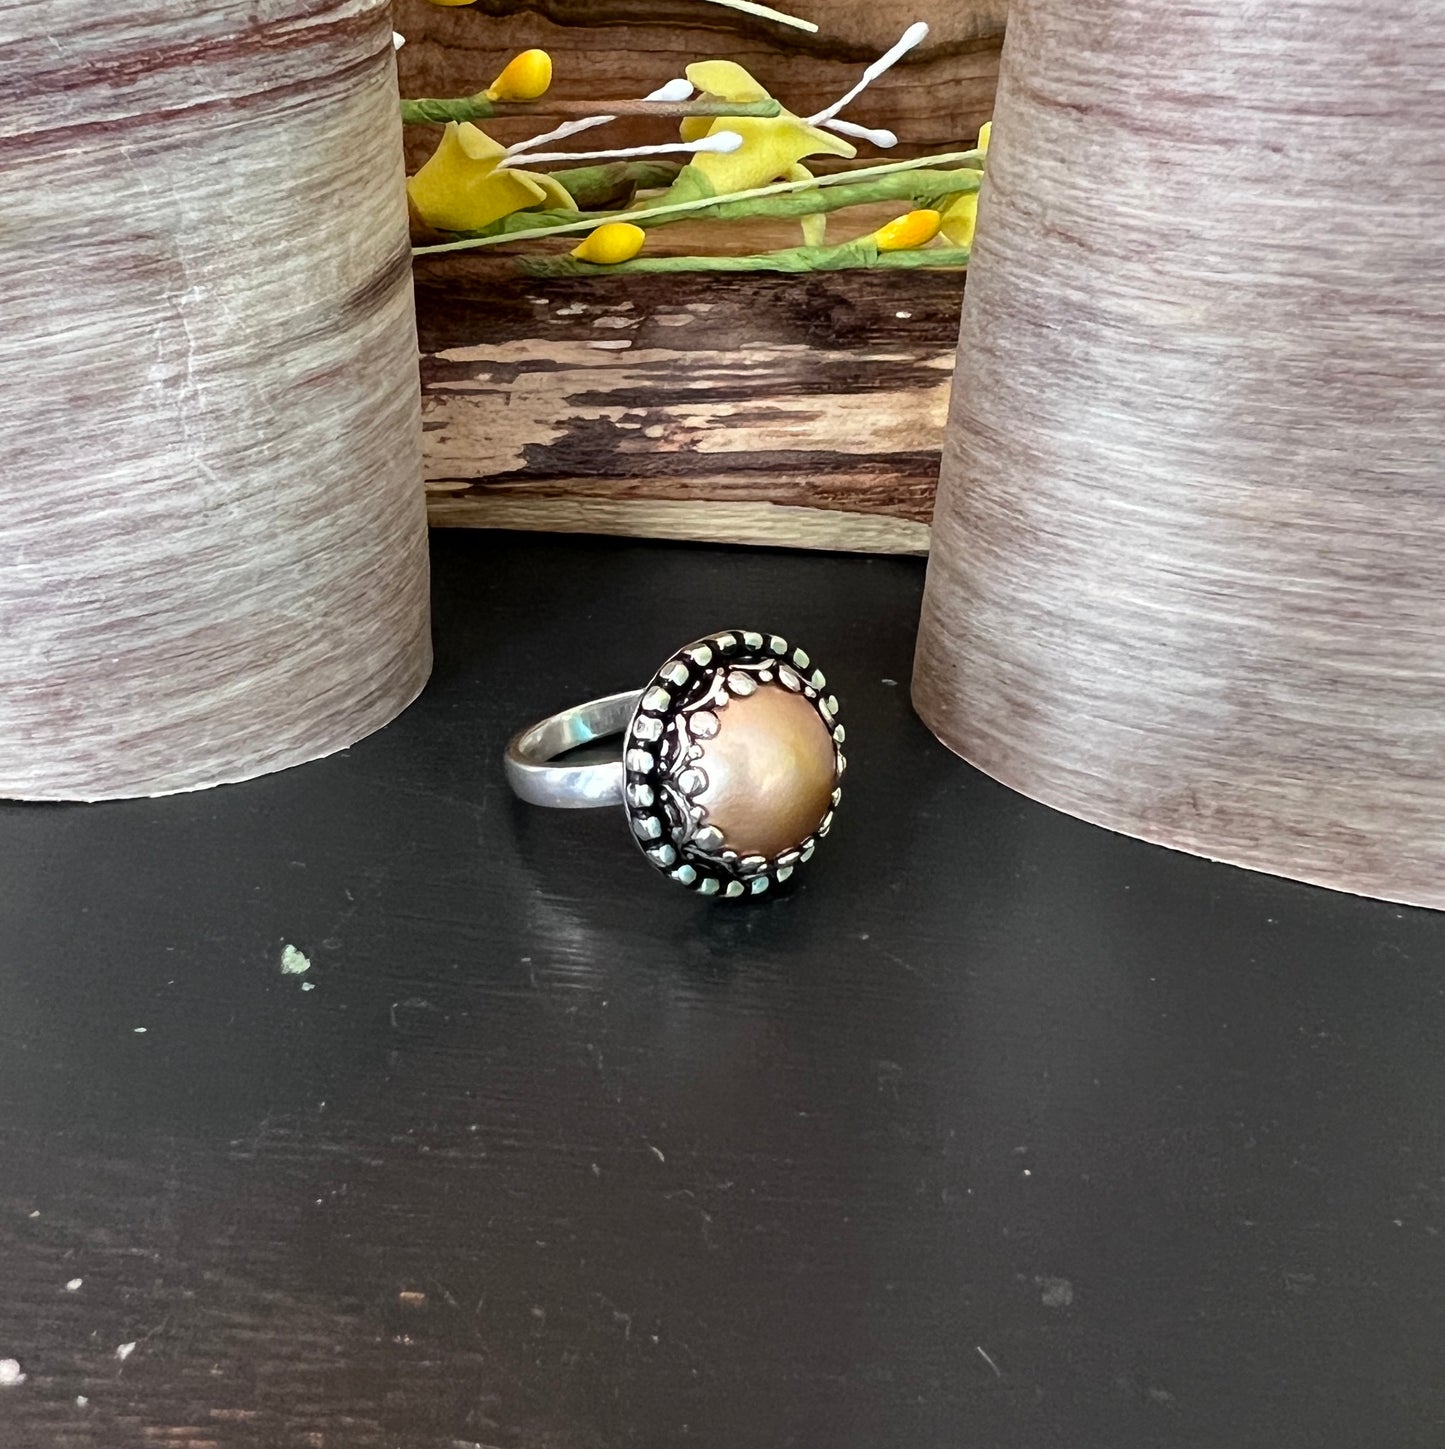 Golden Mabe Pearl Cocktail Ring